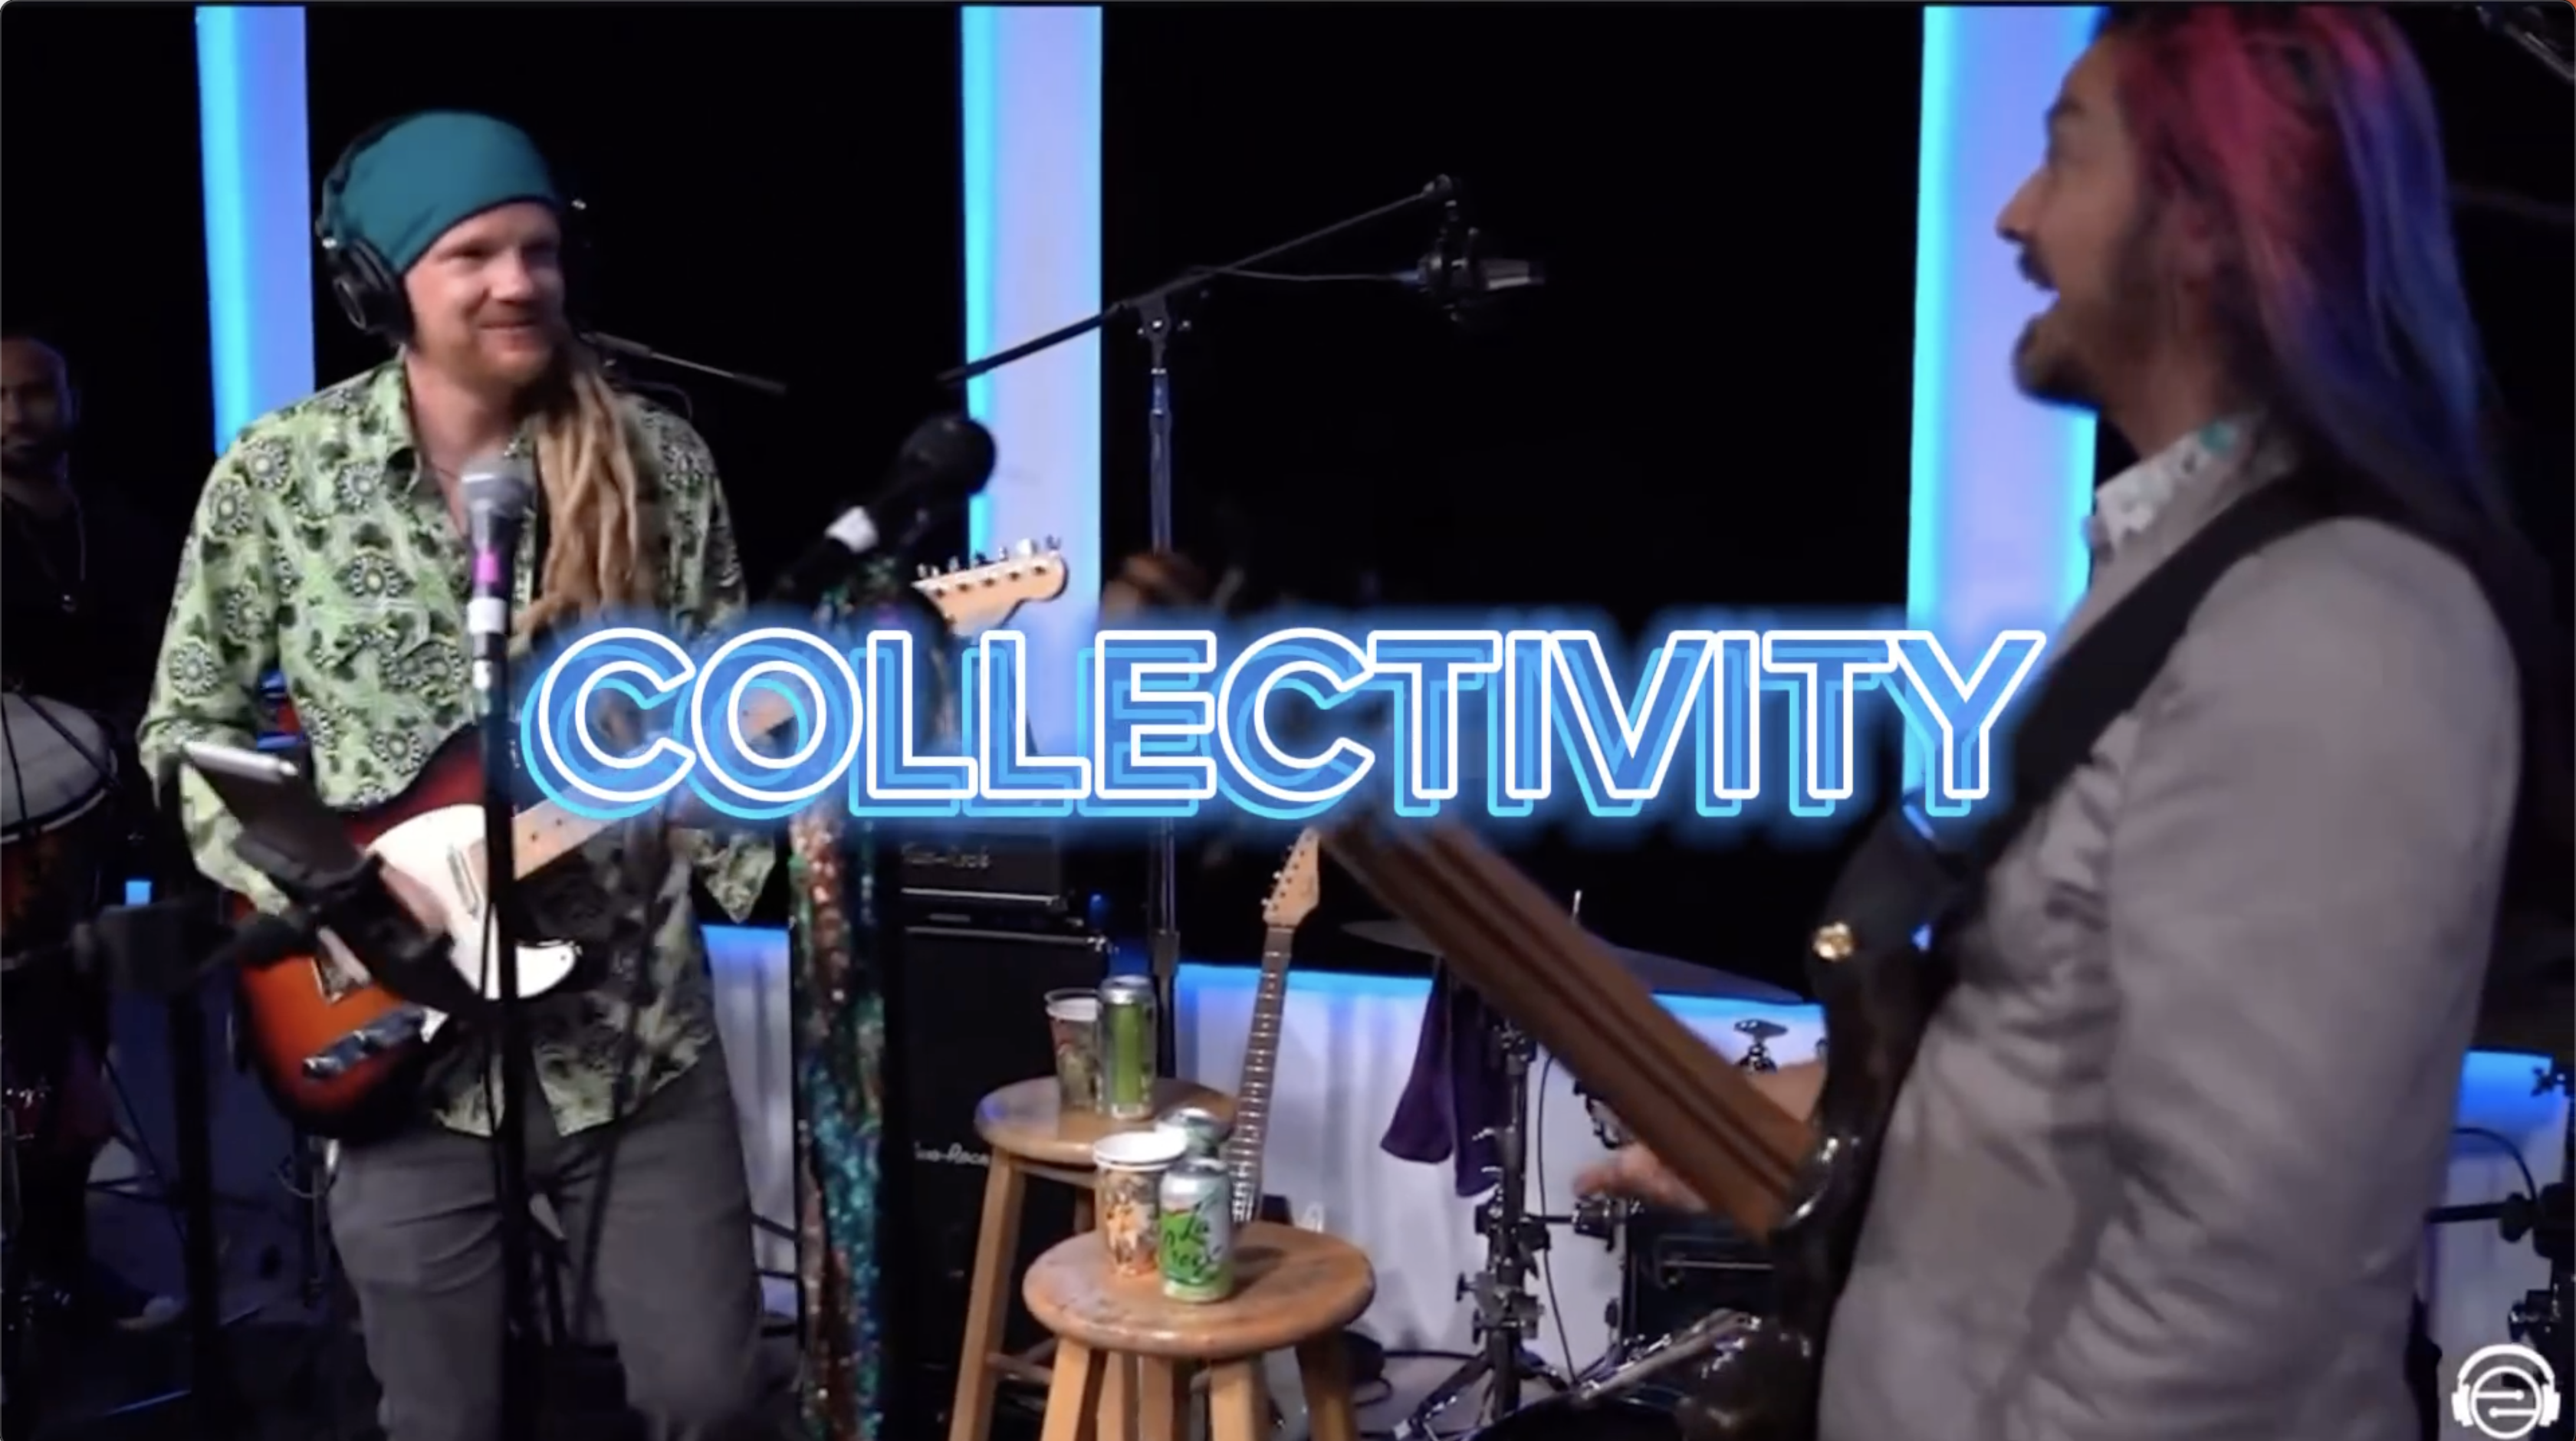 Collectivity